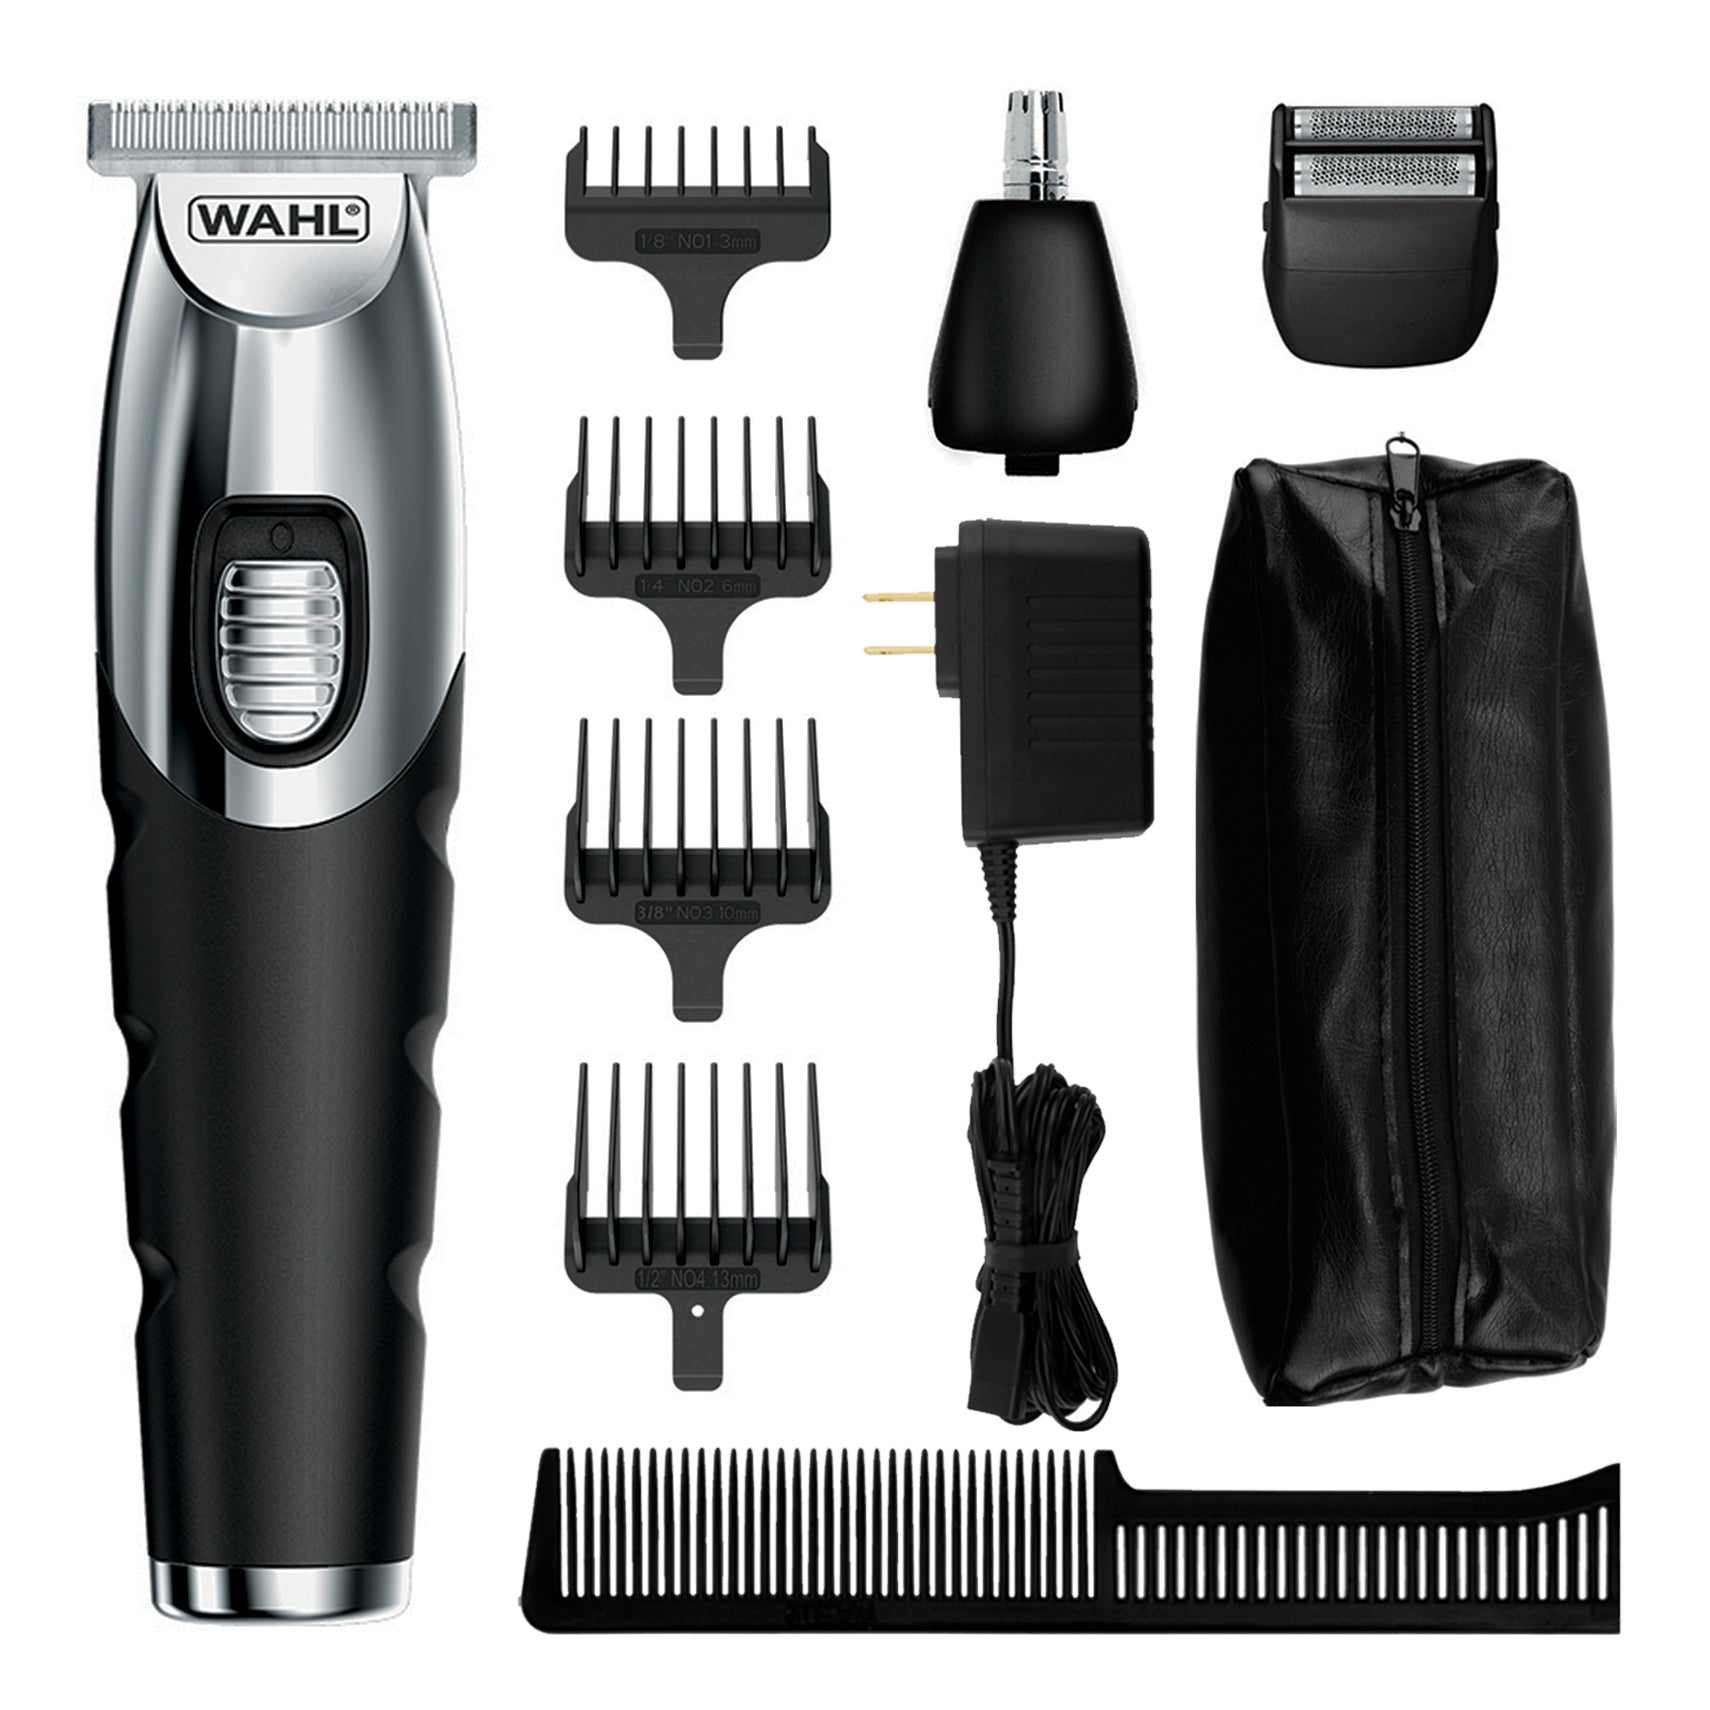 WAHL BEARD &amp; BODY RECHARGEABLE GROOMING KIT